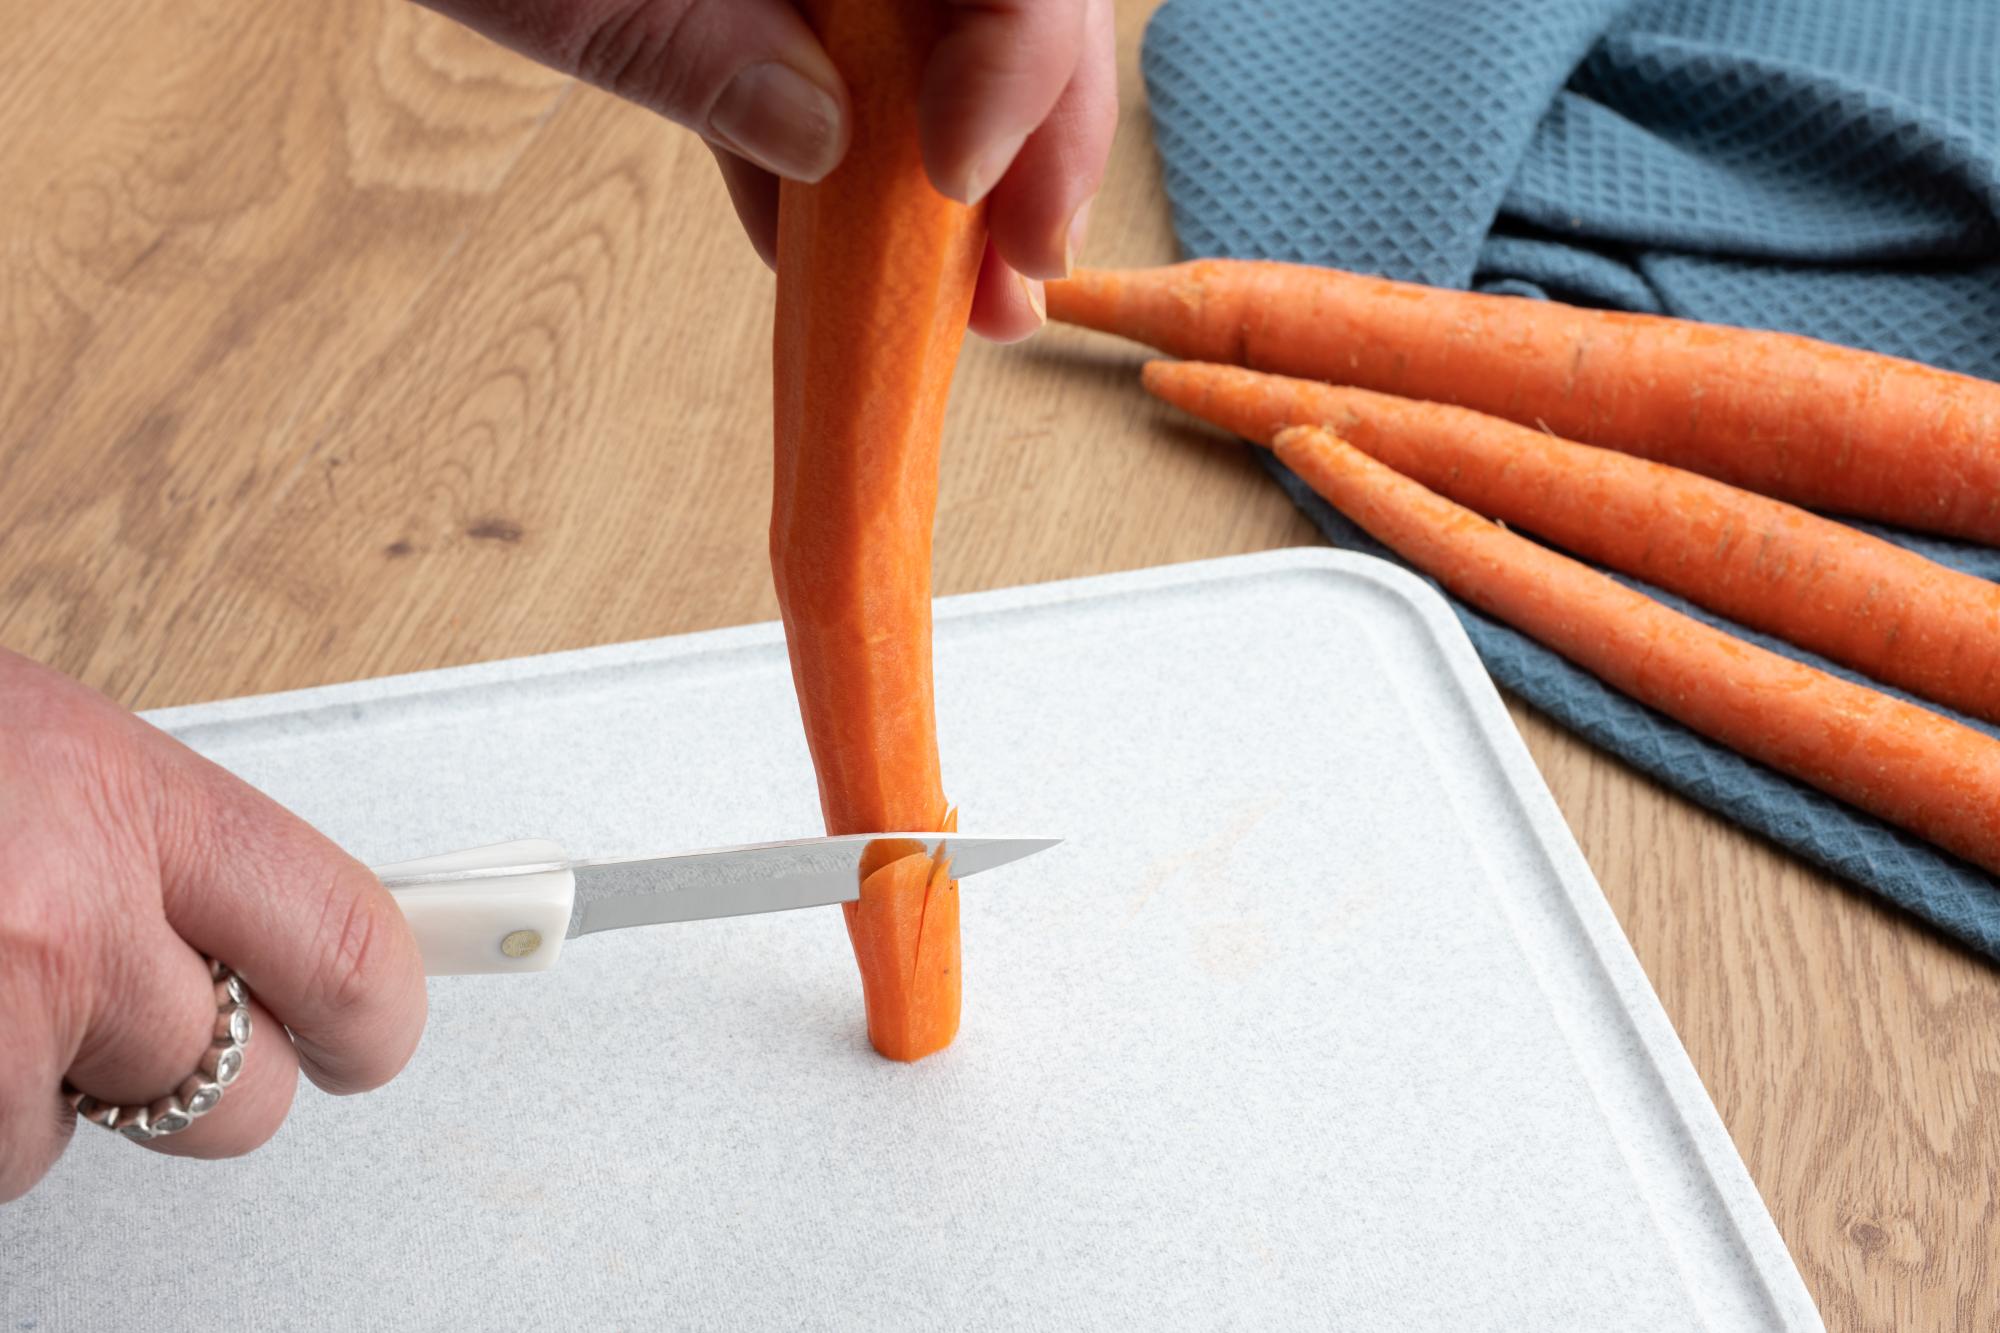 Making the angled cuts in the carrot.